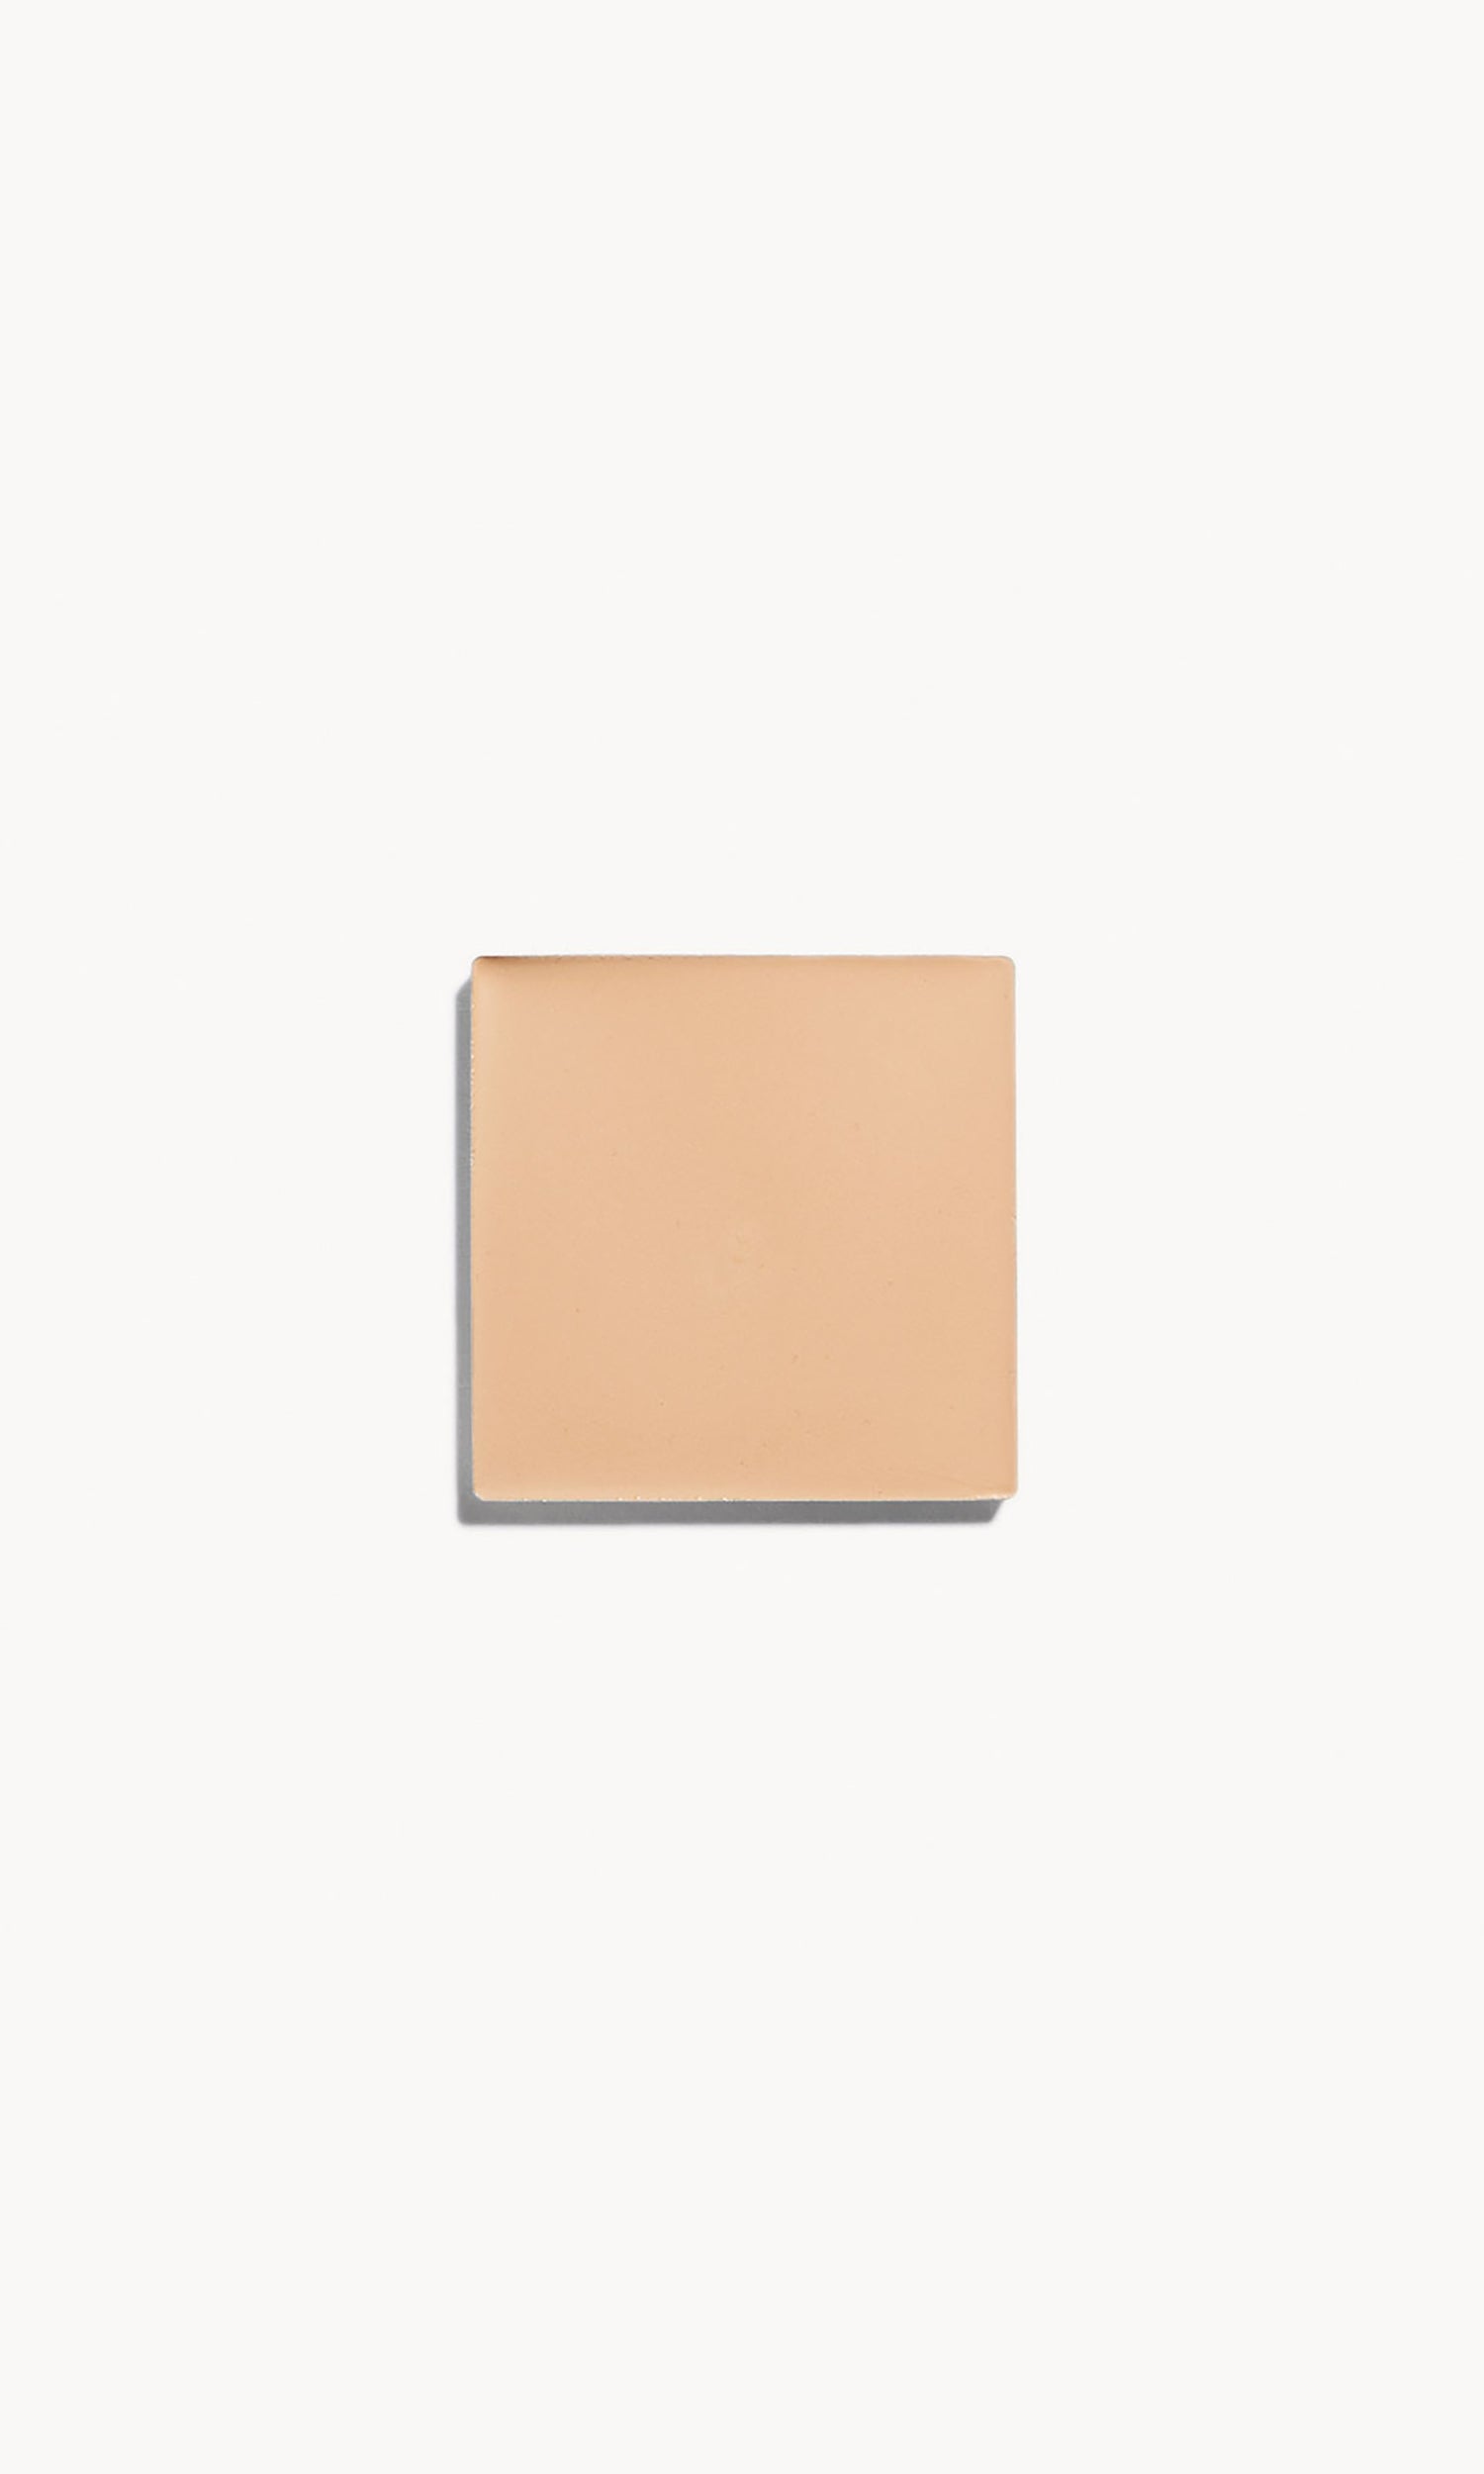 Square of fair neutral cream foundation on a white background